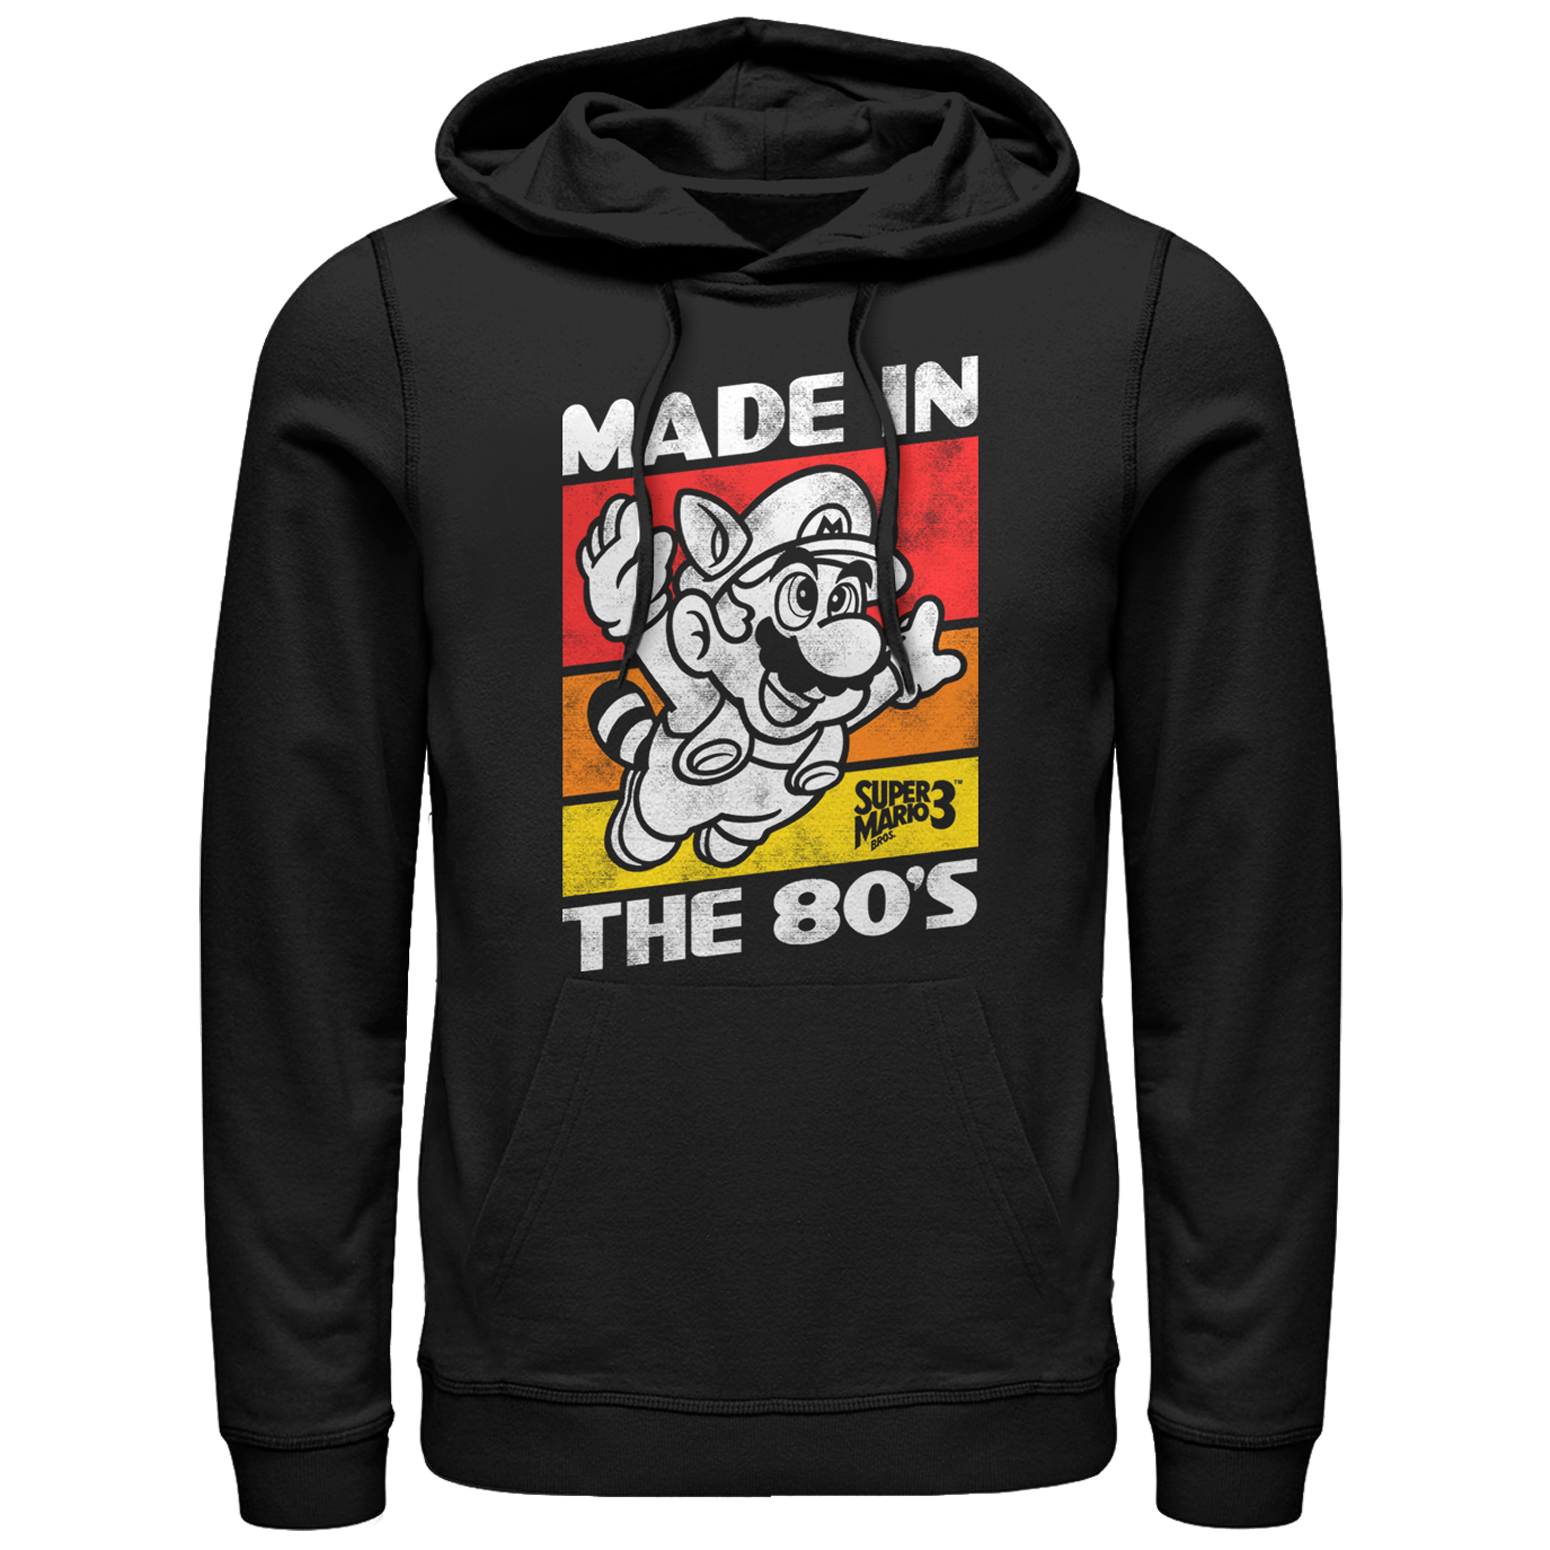 Men's Nintendo Raccoon Mario Made in the 80's  Pull Over Hoodie Black Small - image 1 of 4